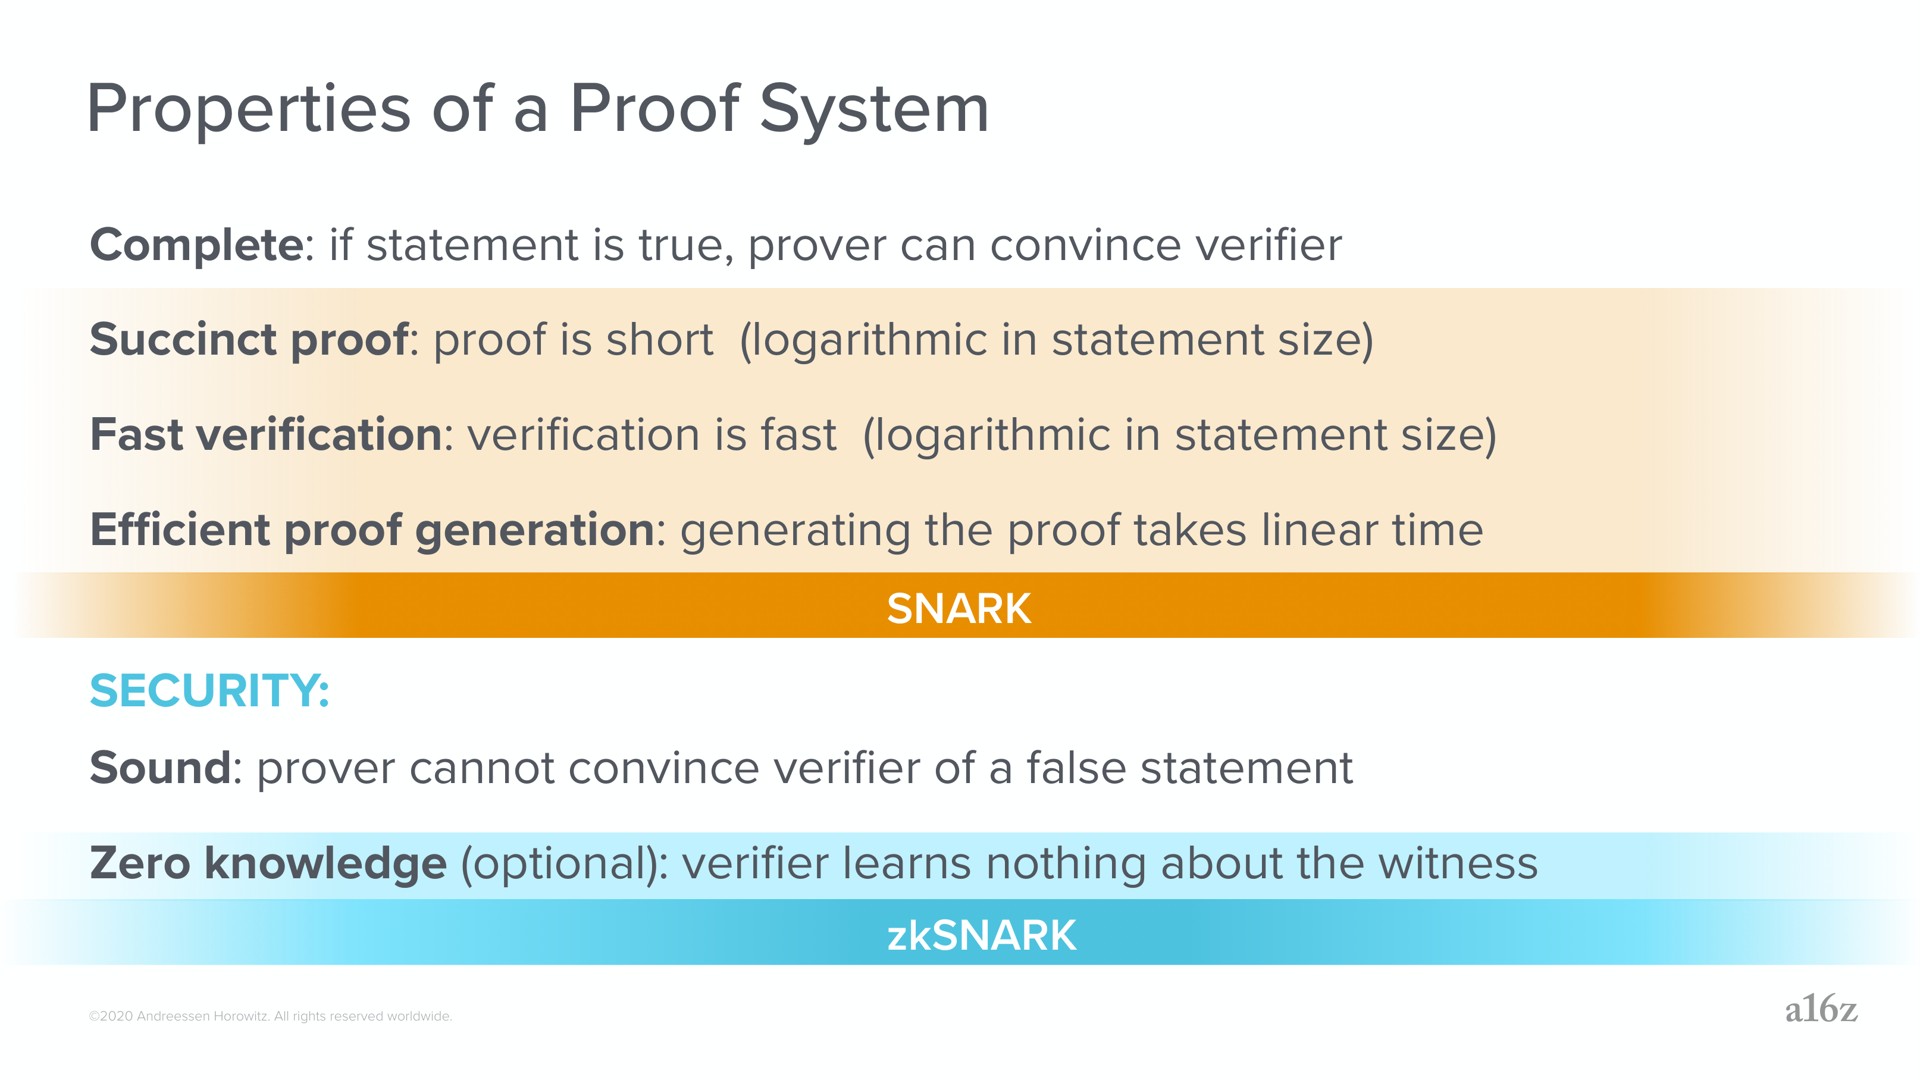 properties of a proof system | a16z